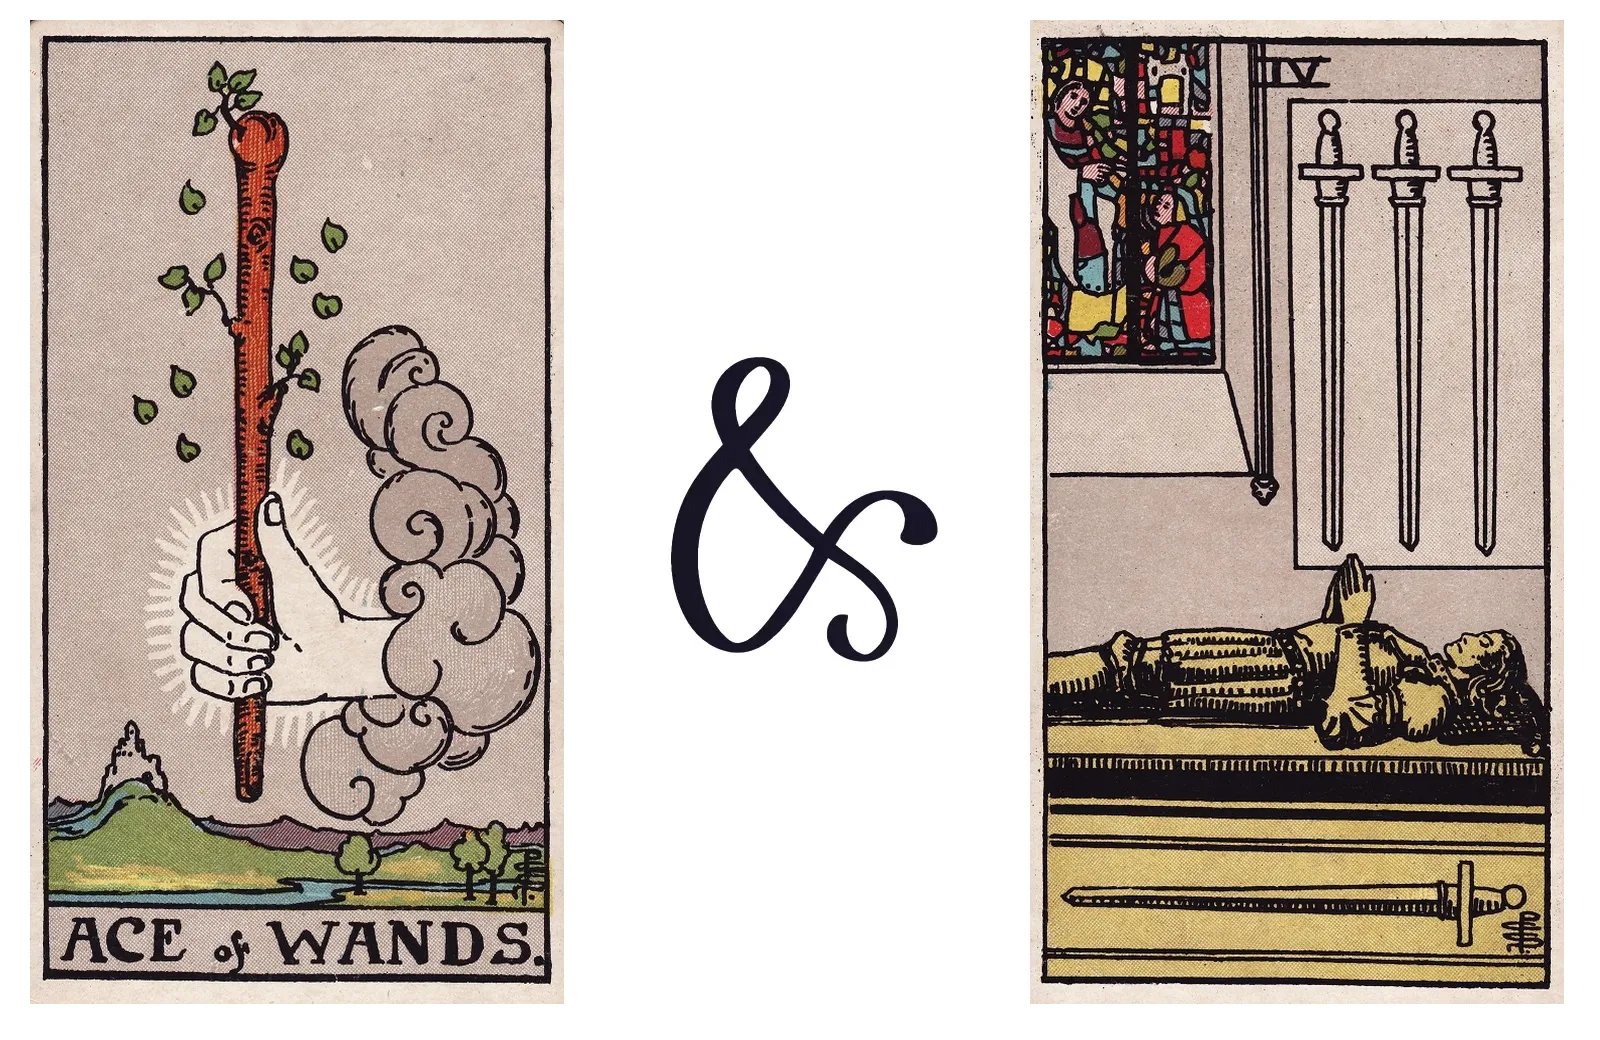 Ace of Wands and Four of Swords